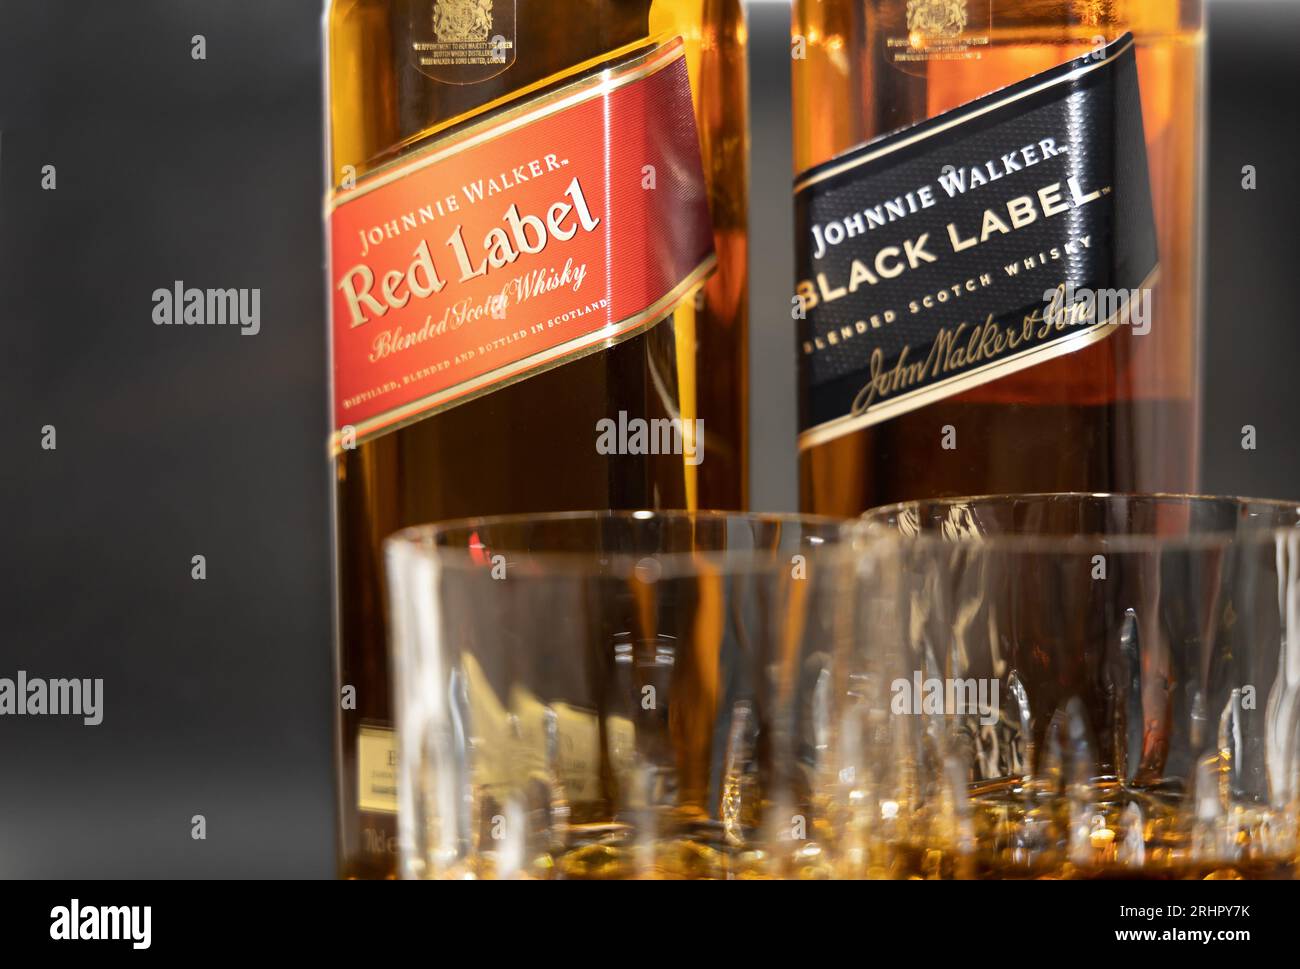 Two glasses of whiskey on the background of a bottle of wiskey Johnnie  Walker, Red Label and Black Label Stock Photo - Alamy